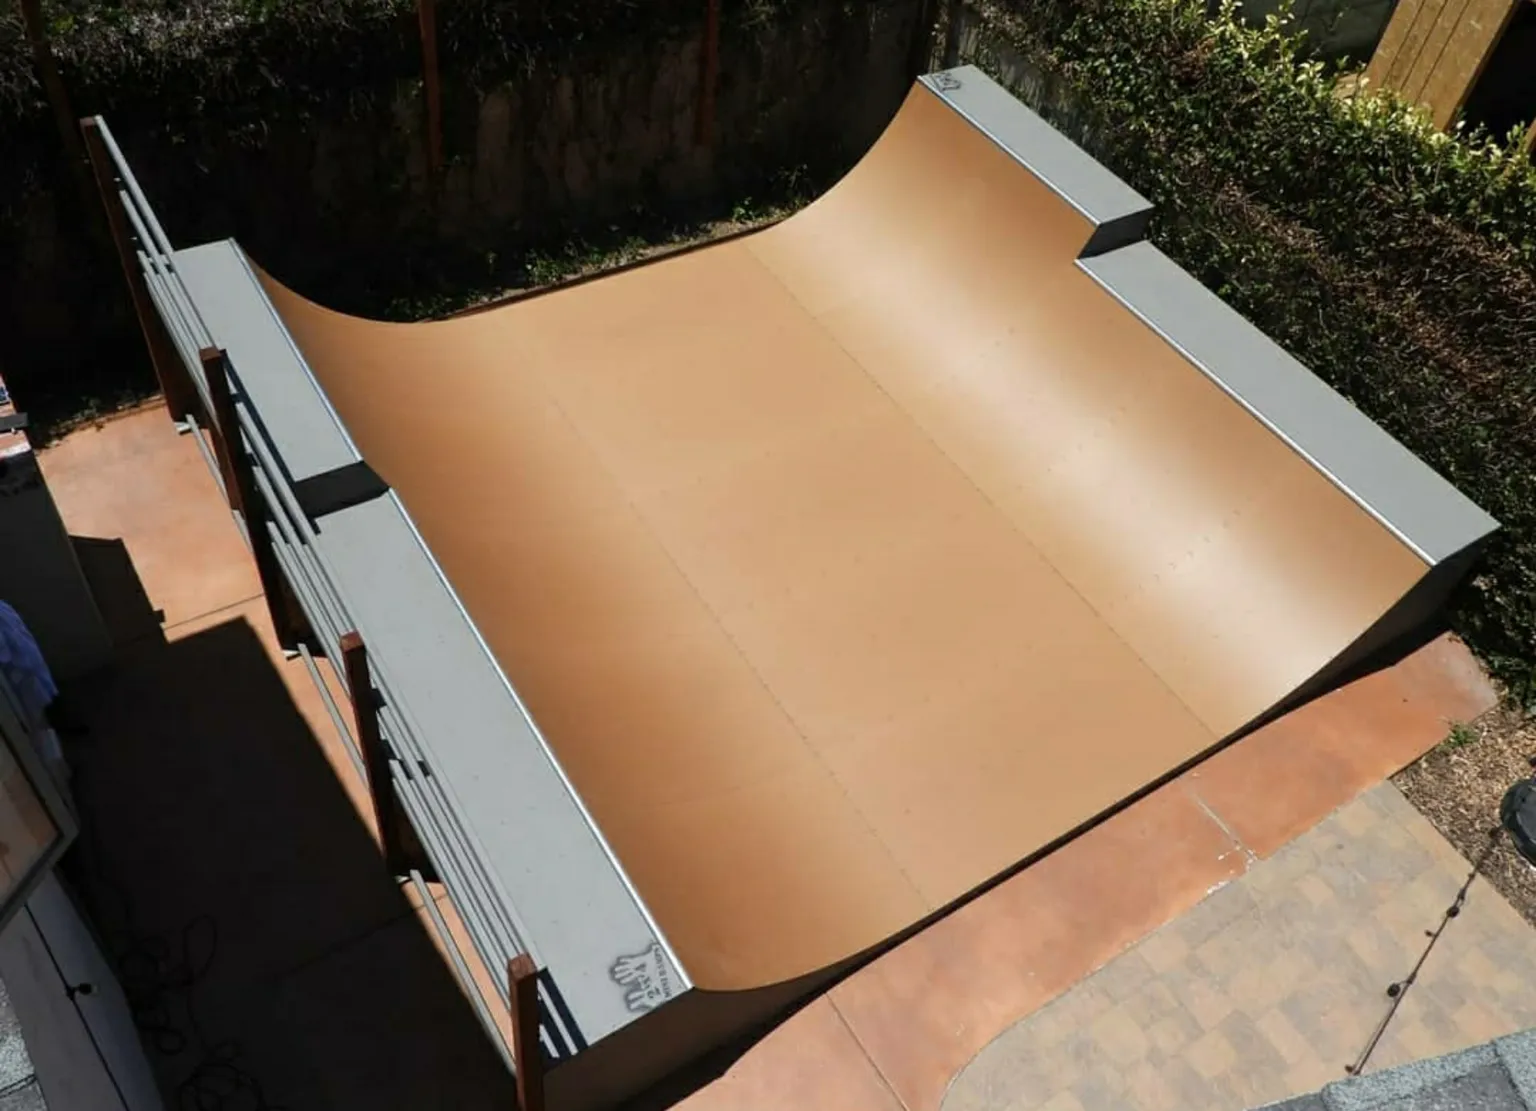 Aerial view of three and a half foot high miniramp in large yard